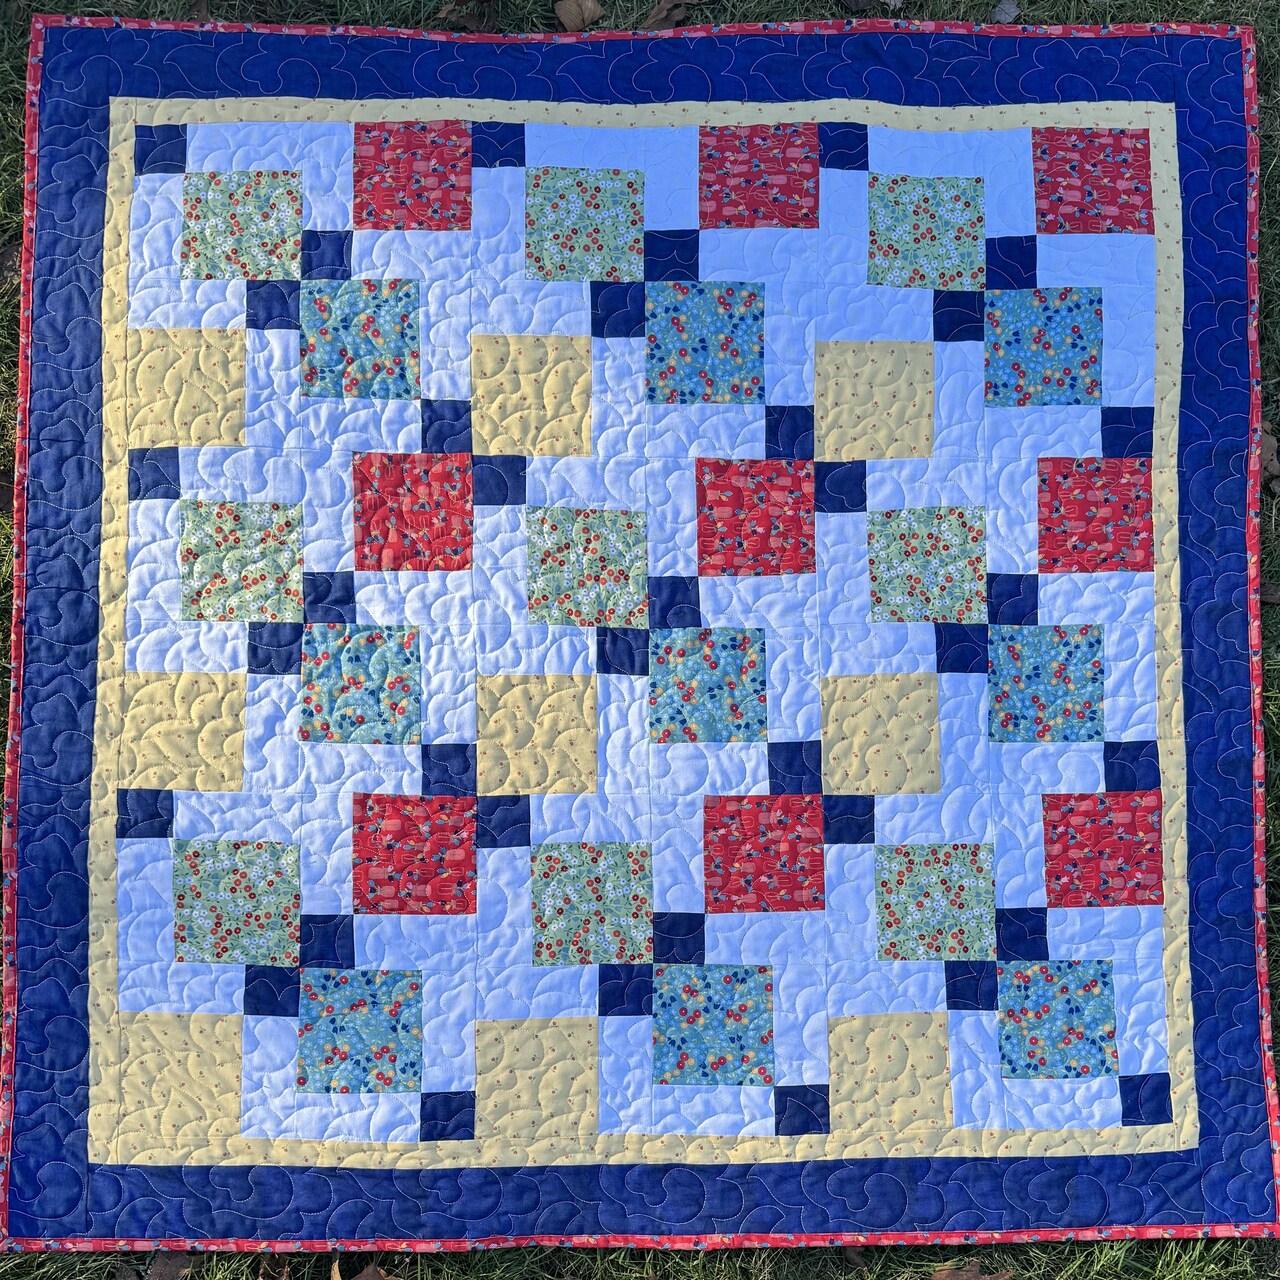 SINGER® PROJECTS Tossed 9-Patch Beginner Piecing and Quilting: Part 1 of 3